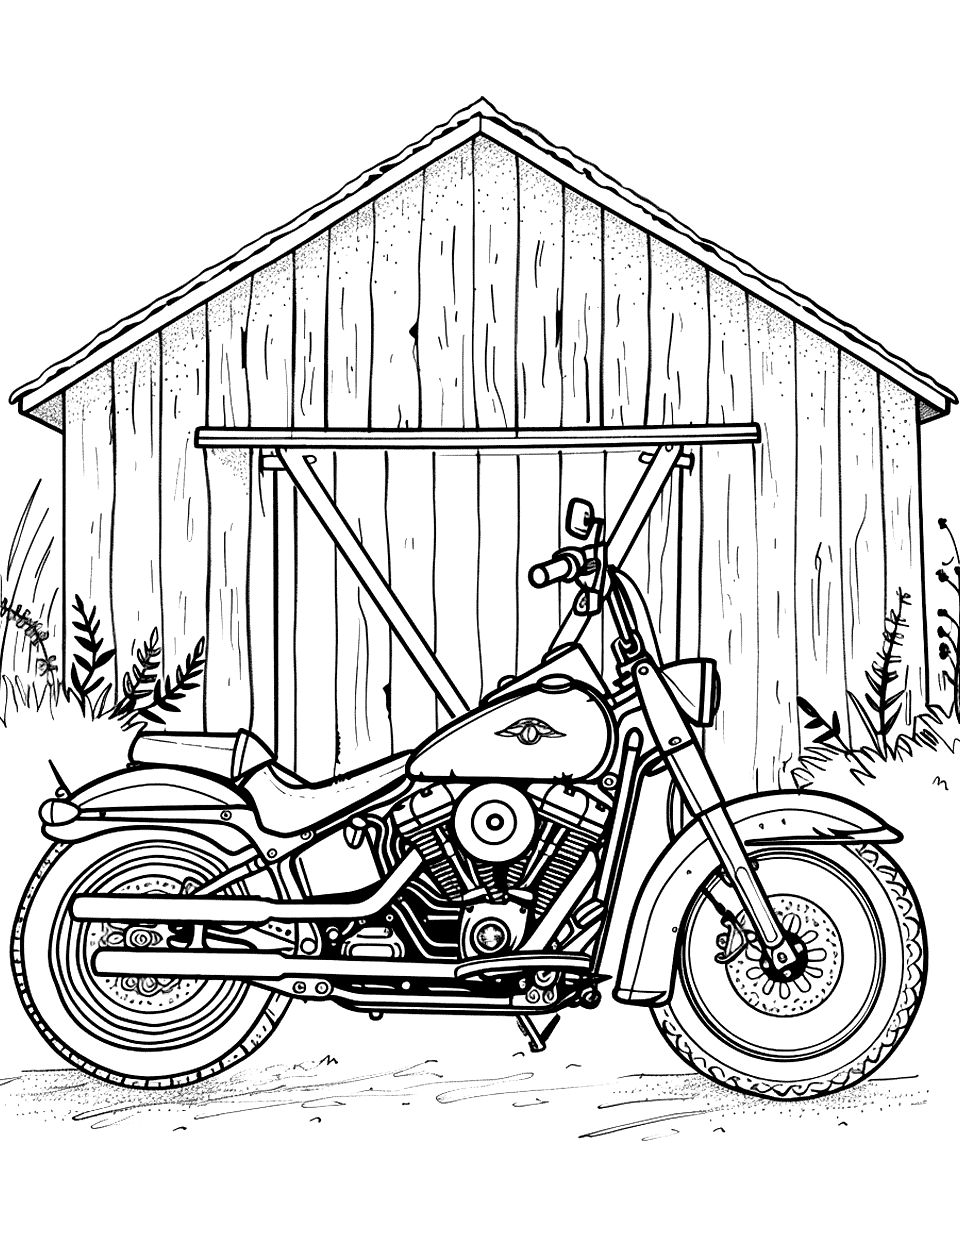 Rustic Barn and Motorcycle Coloring Page - A classic motorcycle parked outside a rustic barn in the countryside.